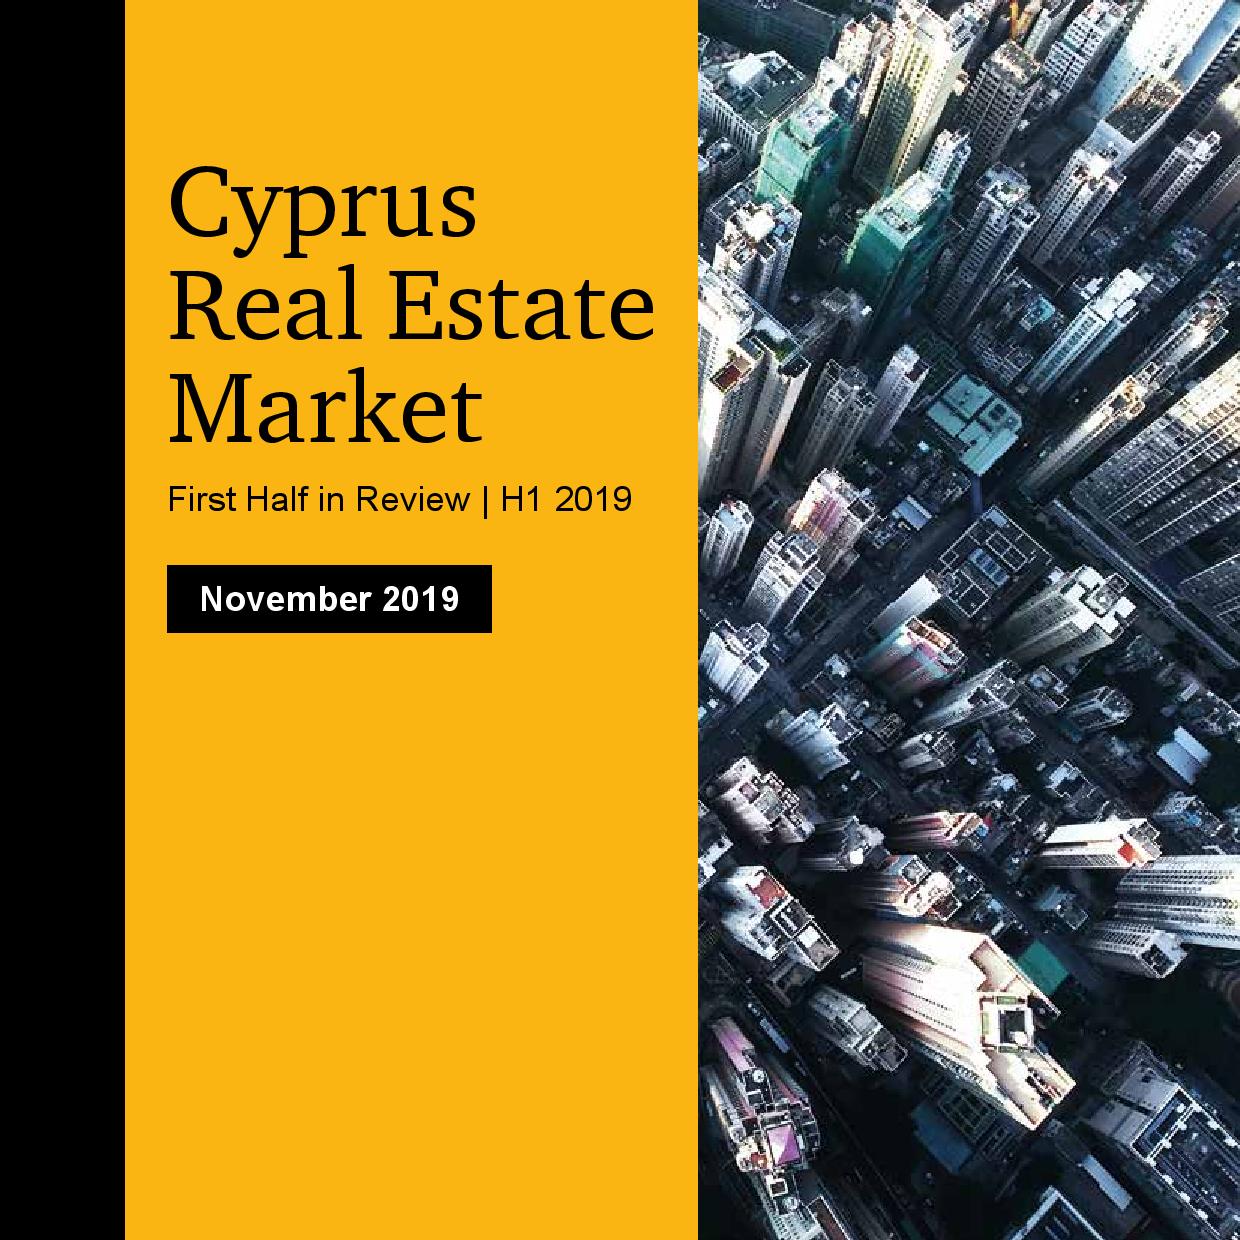 PwC: Cyprus Real Estate Market - First Half in Review 2019